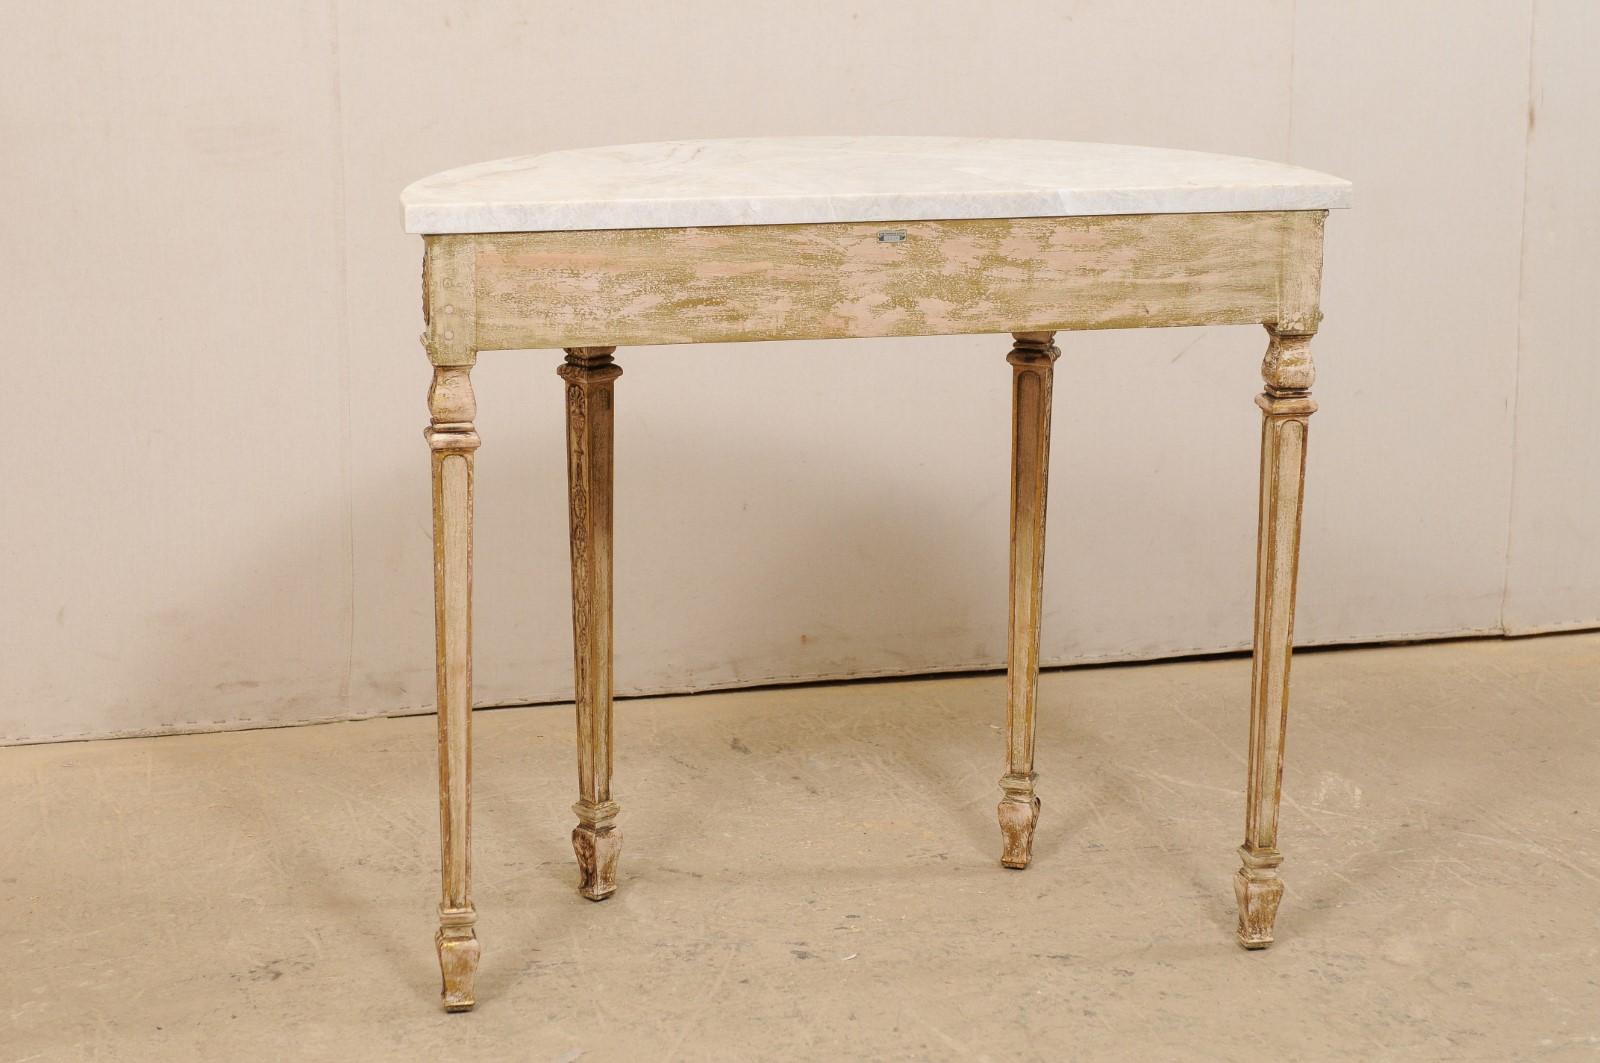 Wood Antique Italian-Style Demilune Table with Nicely Carved Accents & New Marble Top